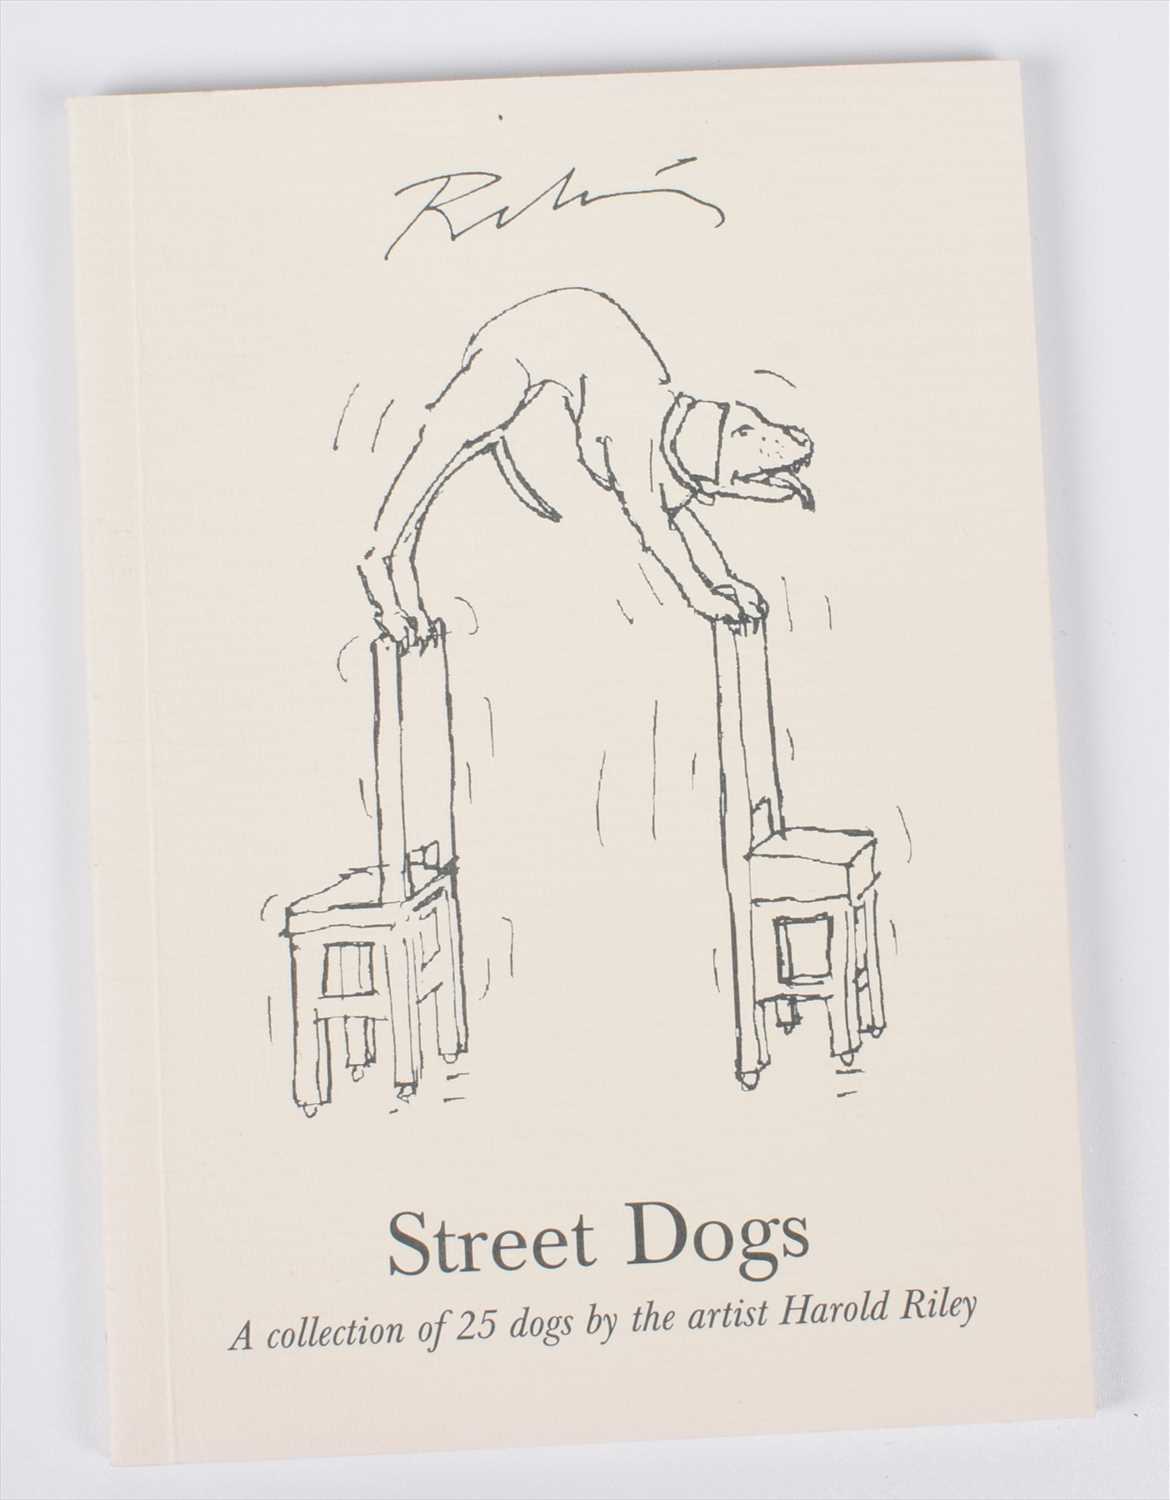 Lot 137 - Signed edition of "Street Dogs" by Harold Riley, with original dog drawing.